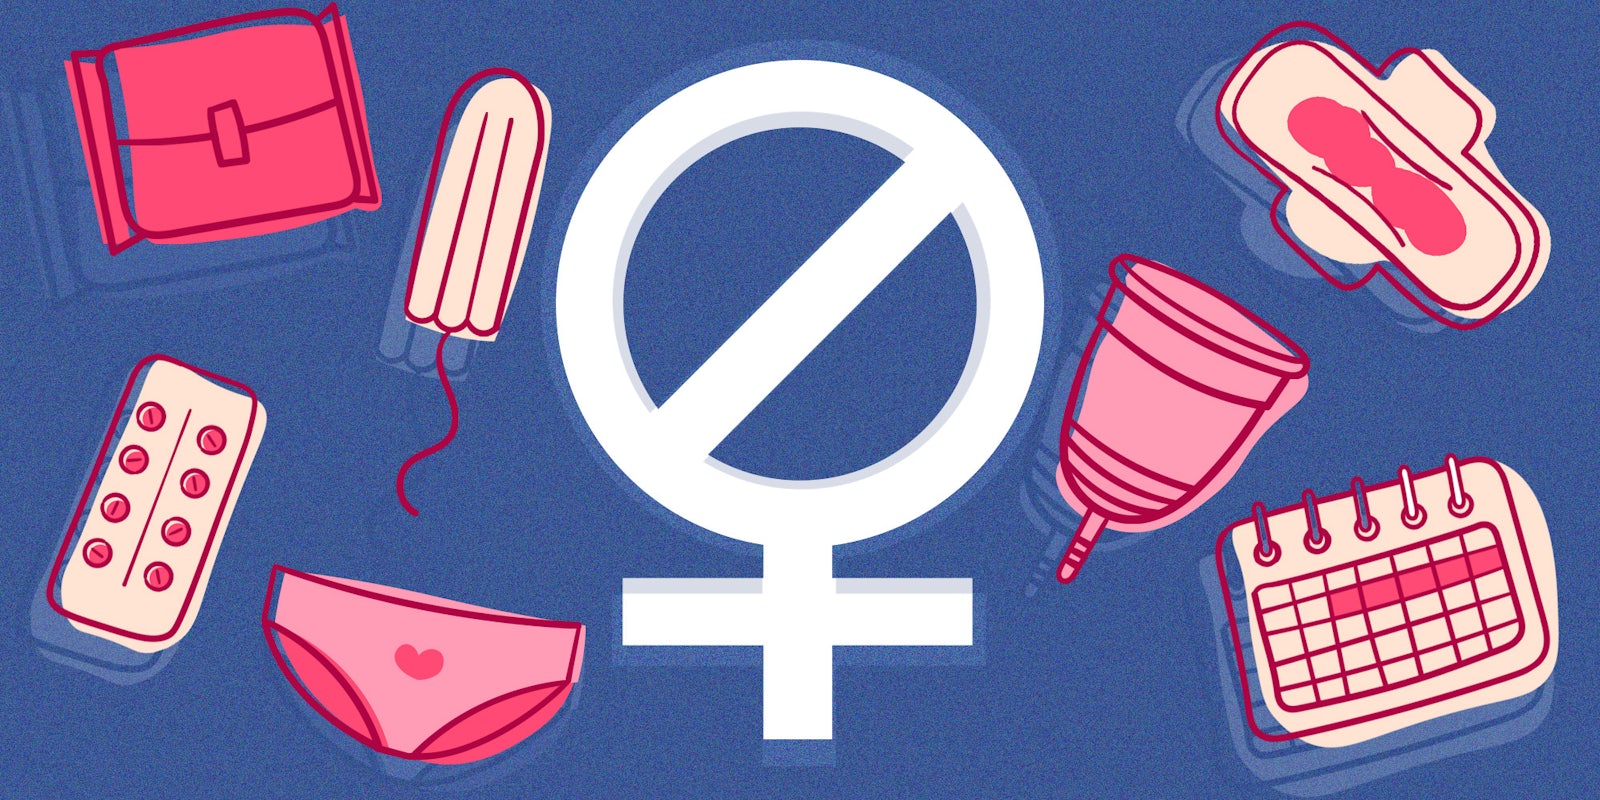 women symbol with 'no' crossbar in facebook blues, surrounded by women's health products